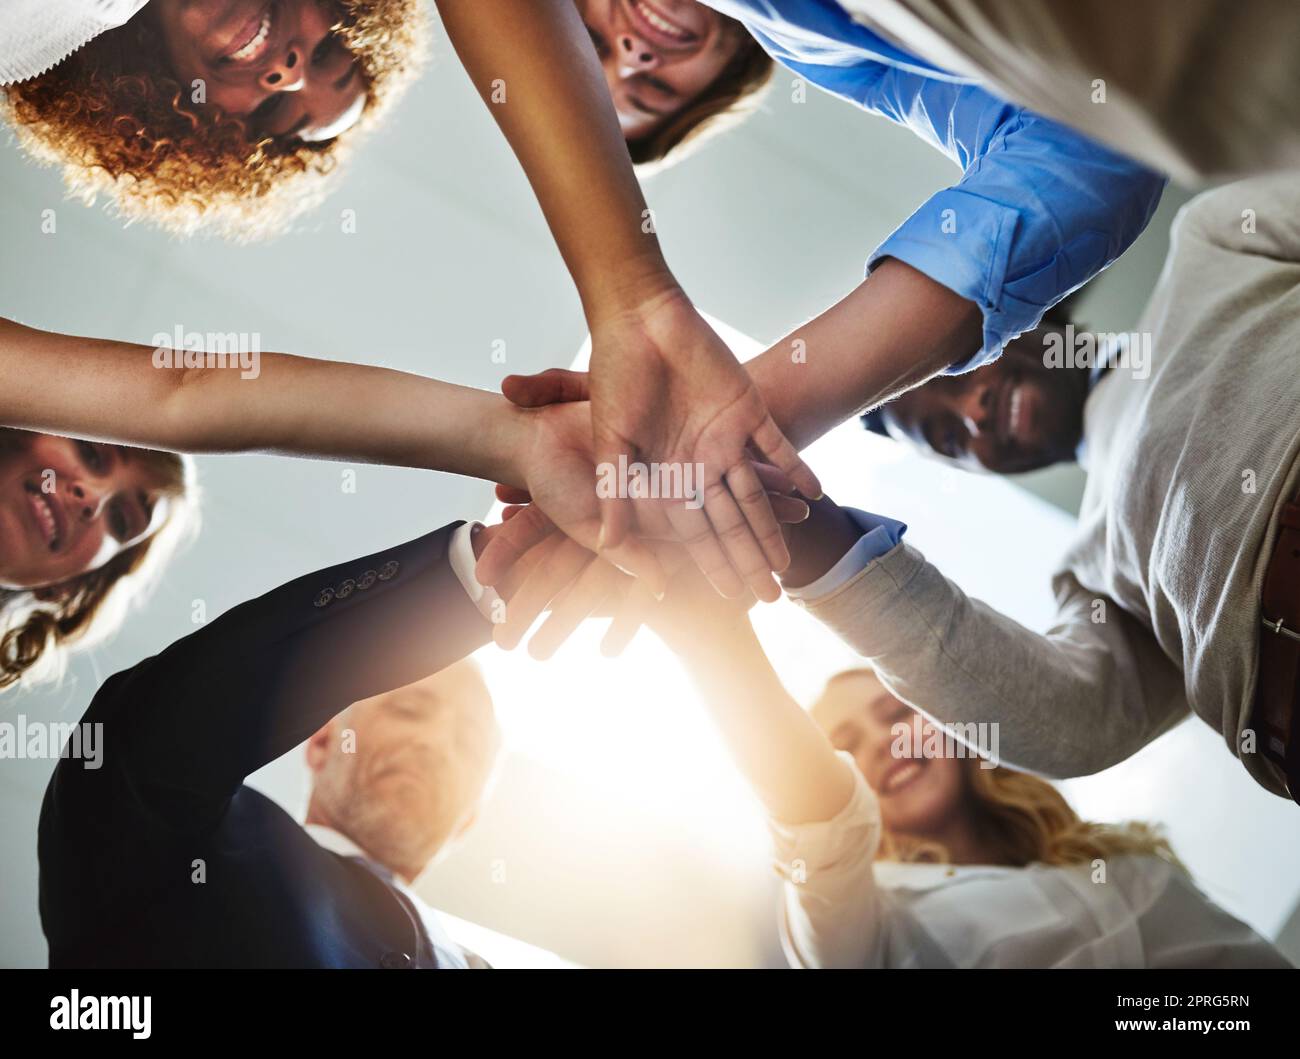 Were so much better together. Low angle shot of a group of colleagues joining their hands in solidarity. Stock Photo